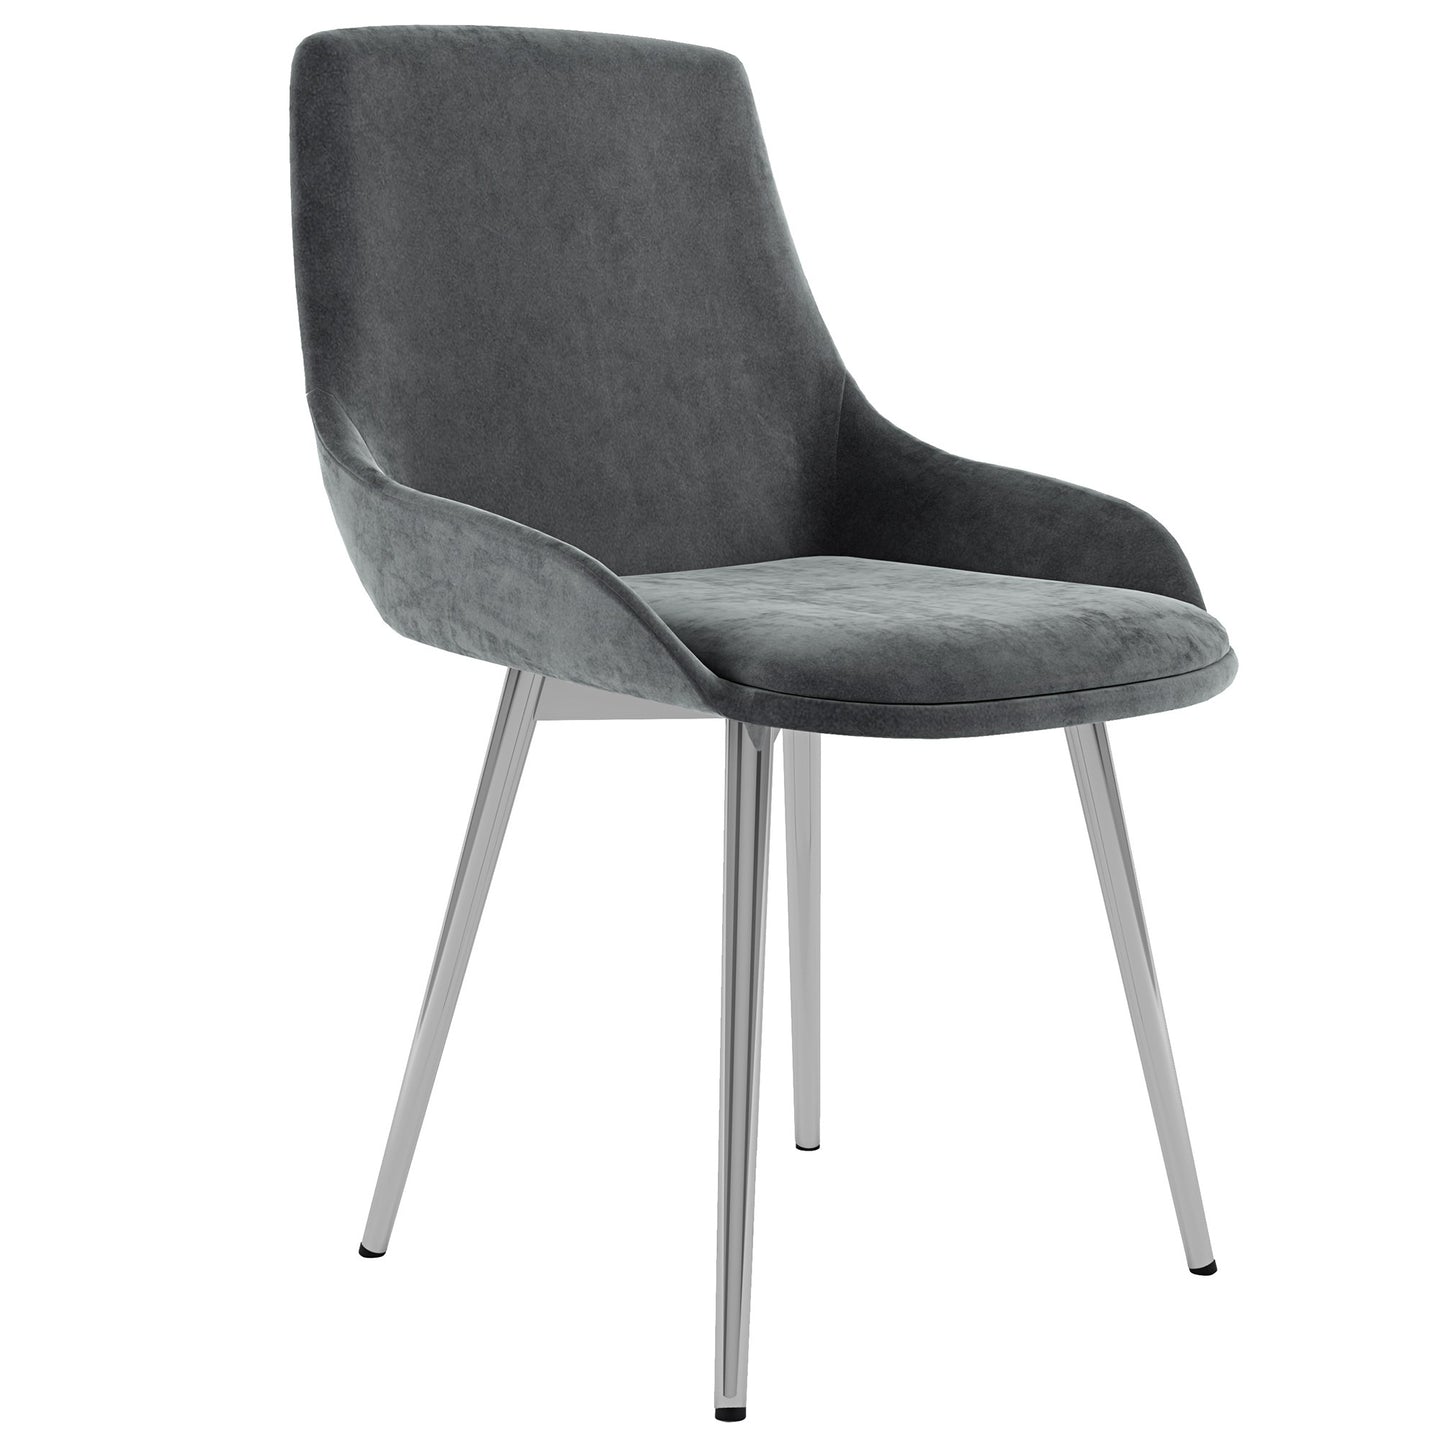 Cassidy Side Chair set of 2 in Grey Price shown for each - 